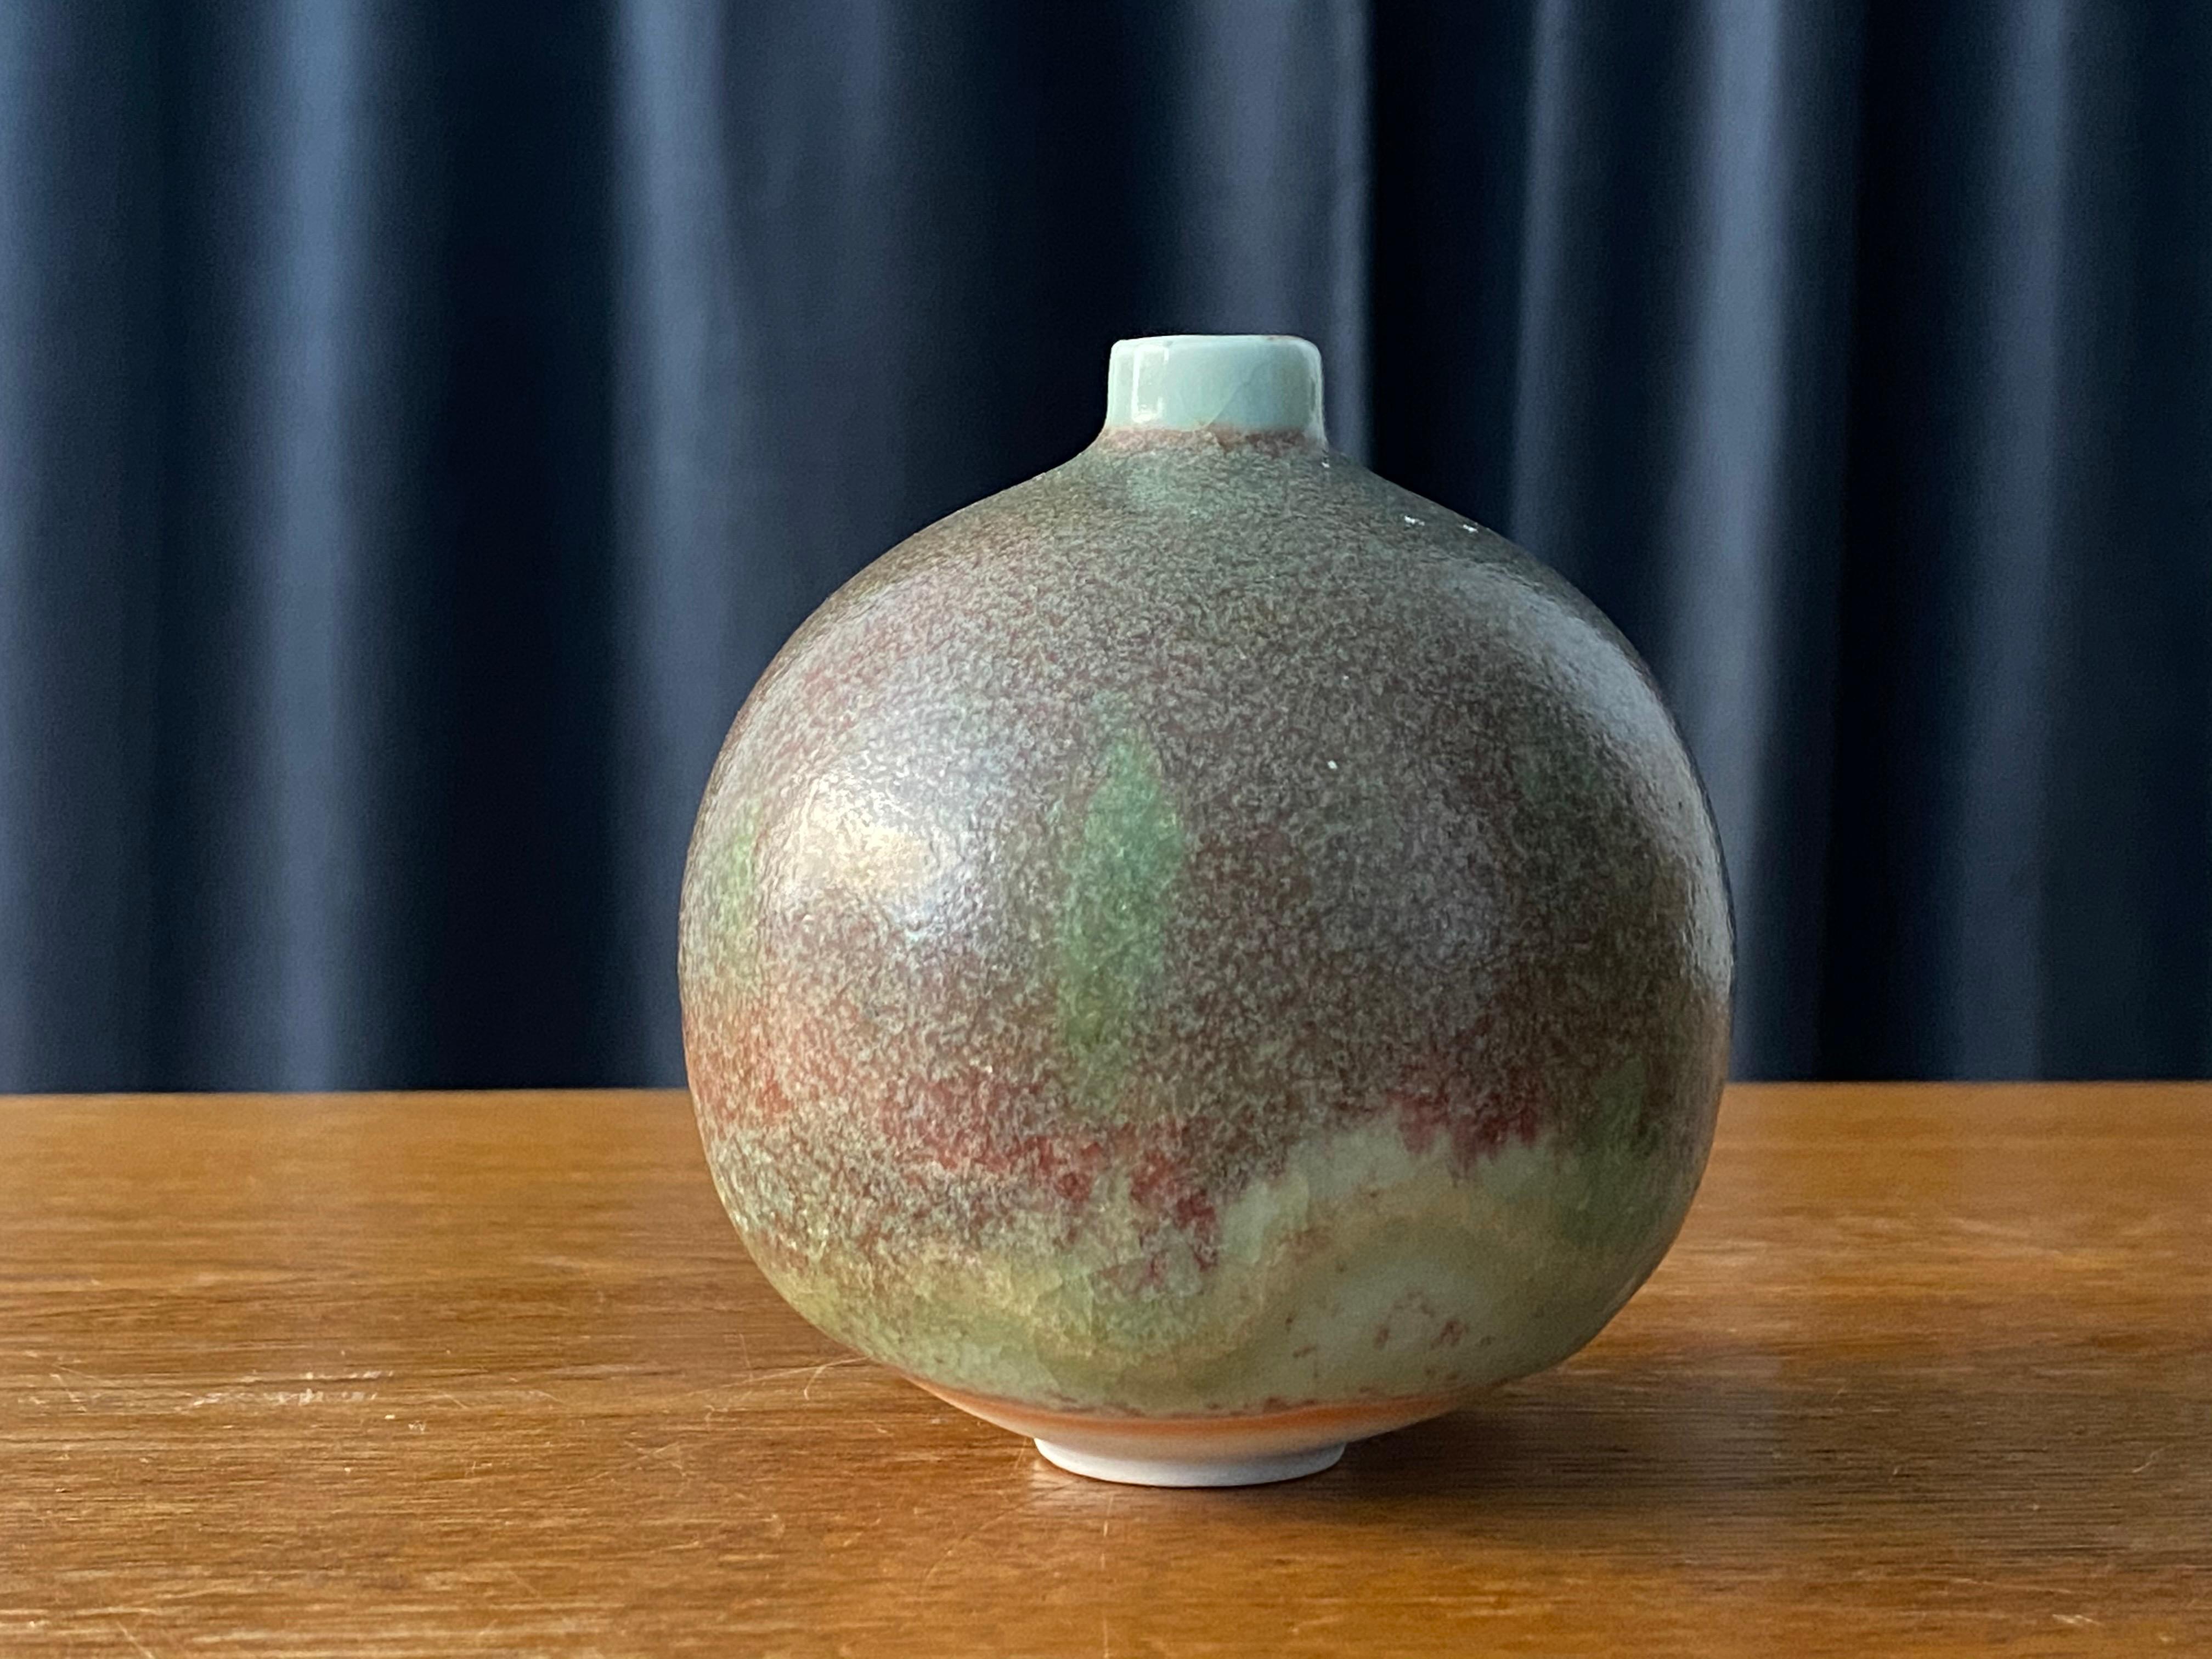 A small and unique studio vase by Ulla och Gustav Kraitz, artist studio Fogdarp, Förslövsholm, Sweden, signed and dated 1976. Has a highly artistic and complicated glaze with tones of turquoise / blue, grey, orange and red.

Other ceramicists of